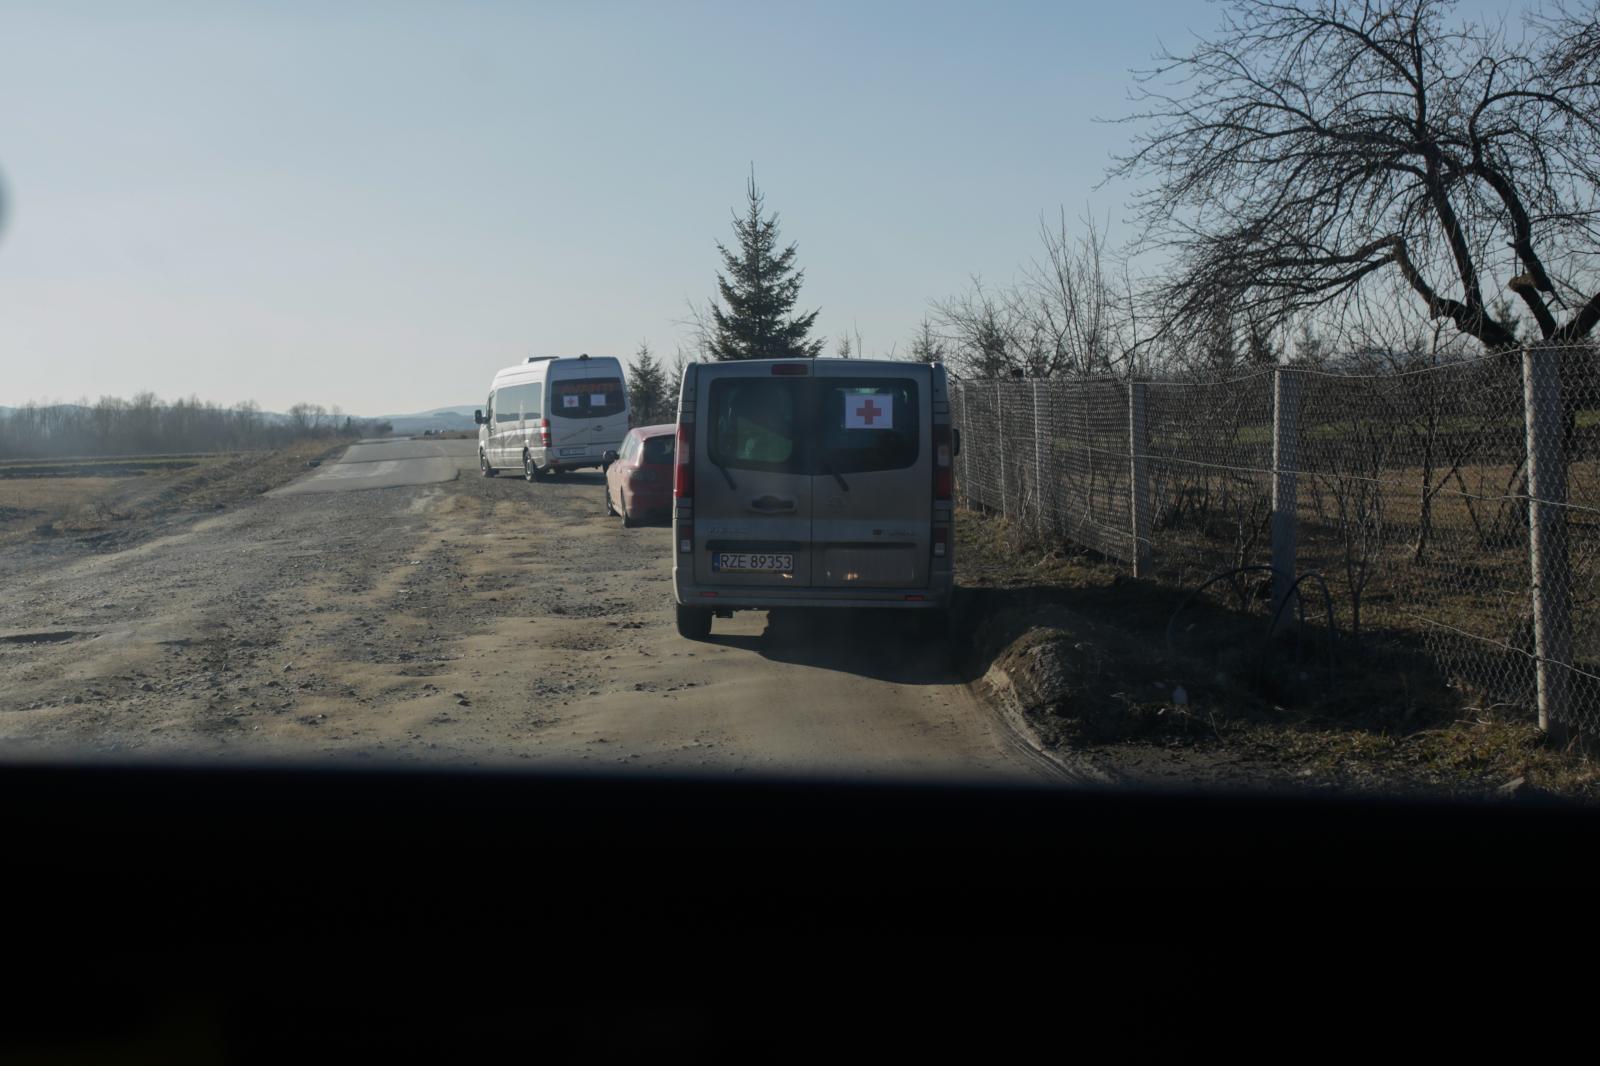 Volunteers cars going from Ukraine to Poland with Pavel on board